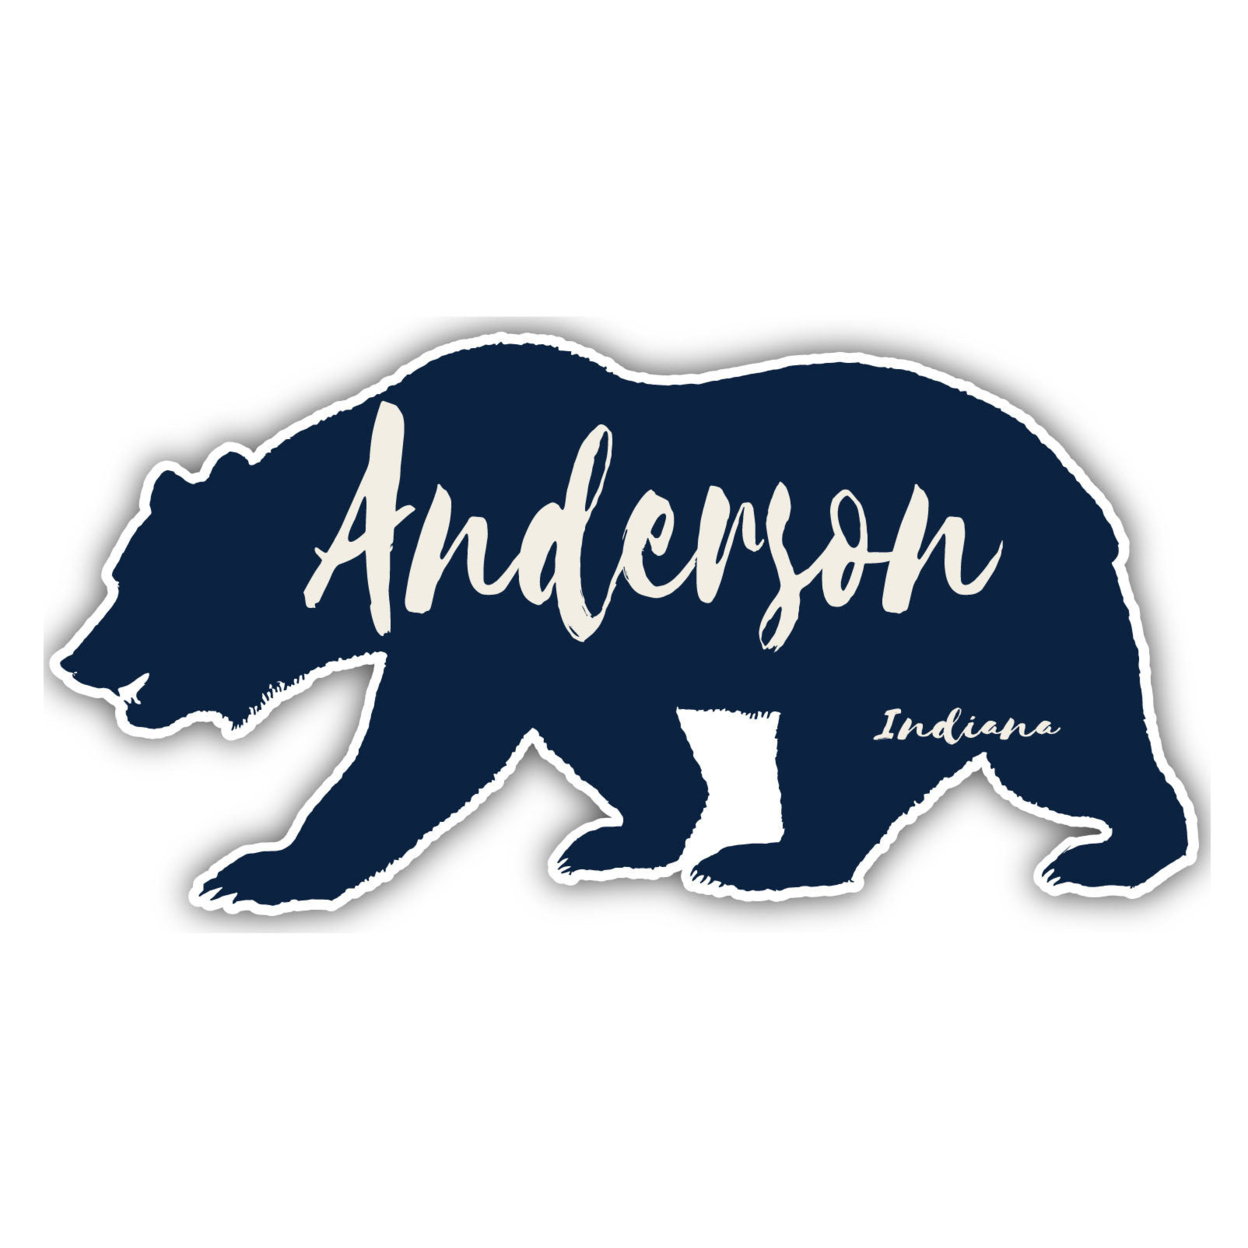 Anderson Indiana Souvenir Decorative Stickers (Choose Theme And Size) - 4-Pack, 2-Inch, Bear